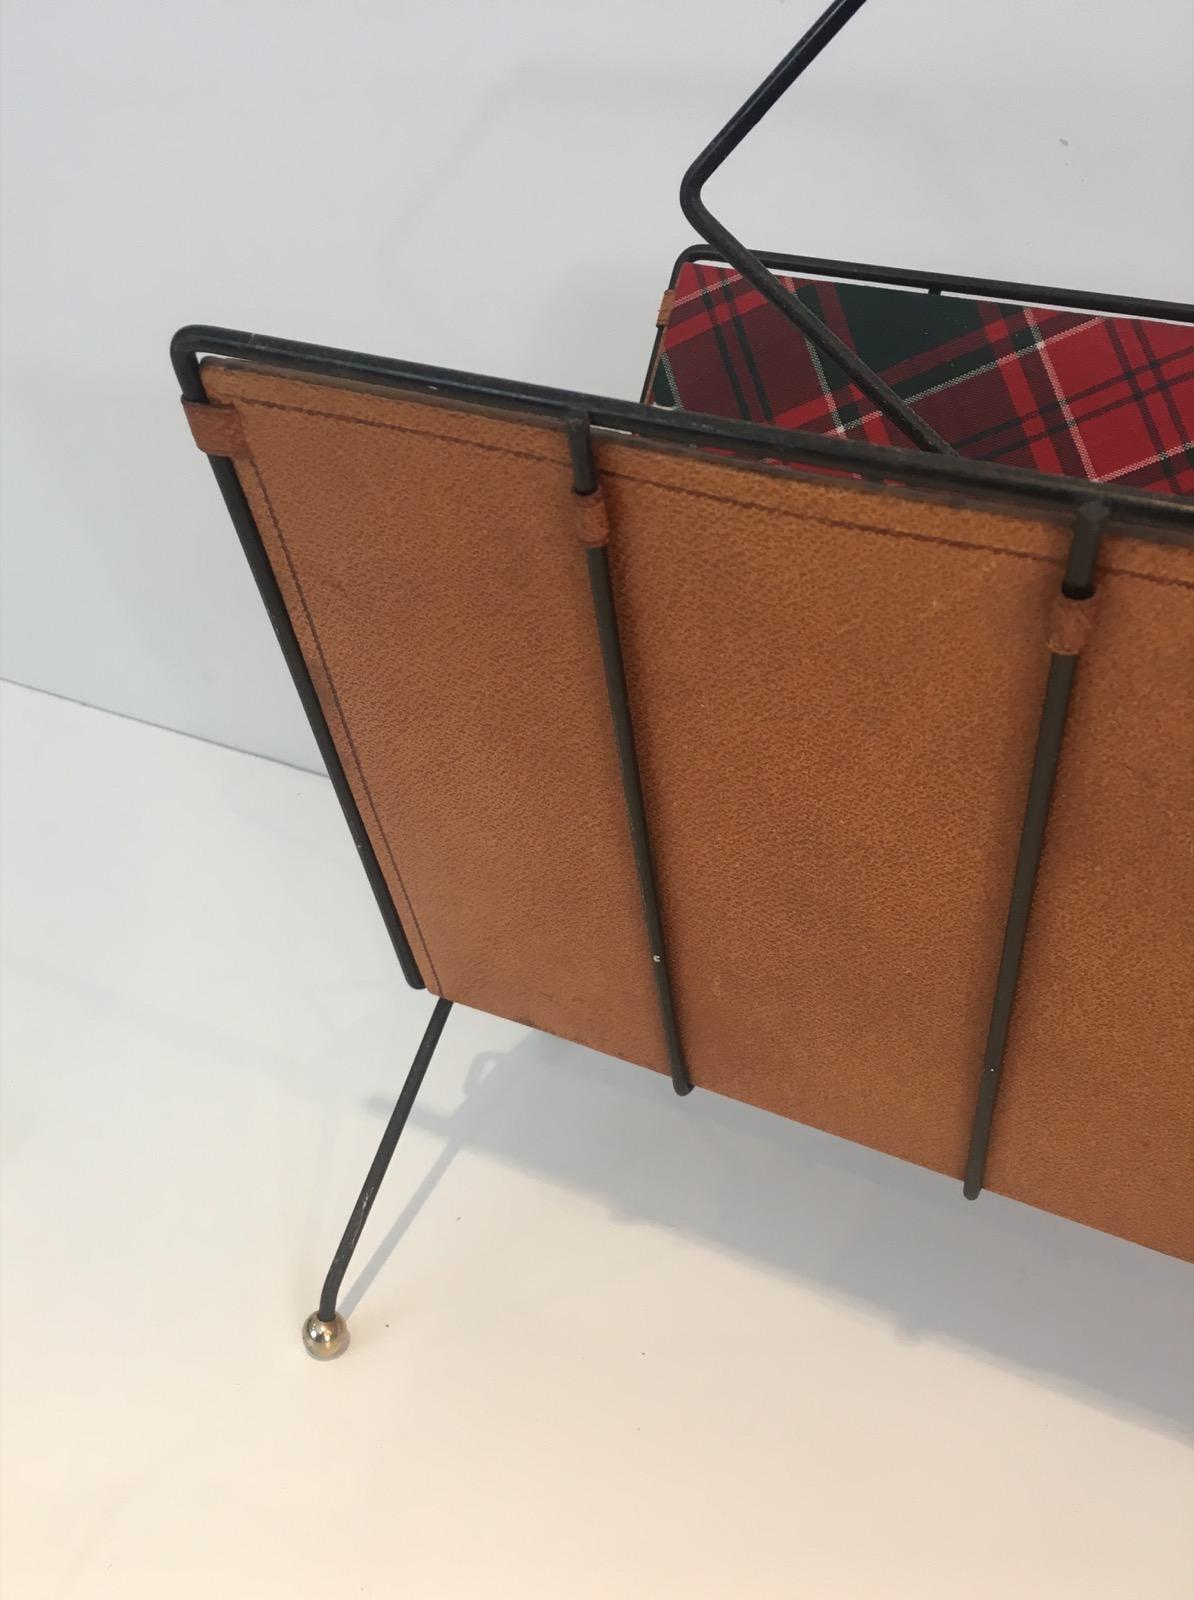 Mid-Century Modern Rare Black Lacquered Metal, Leather and Plaid Fabric Magazine Rack For Sale